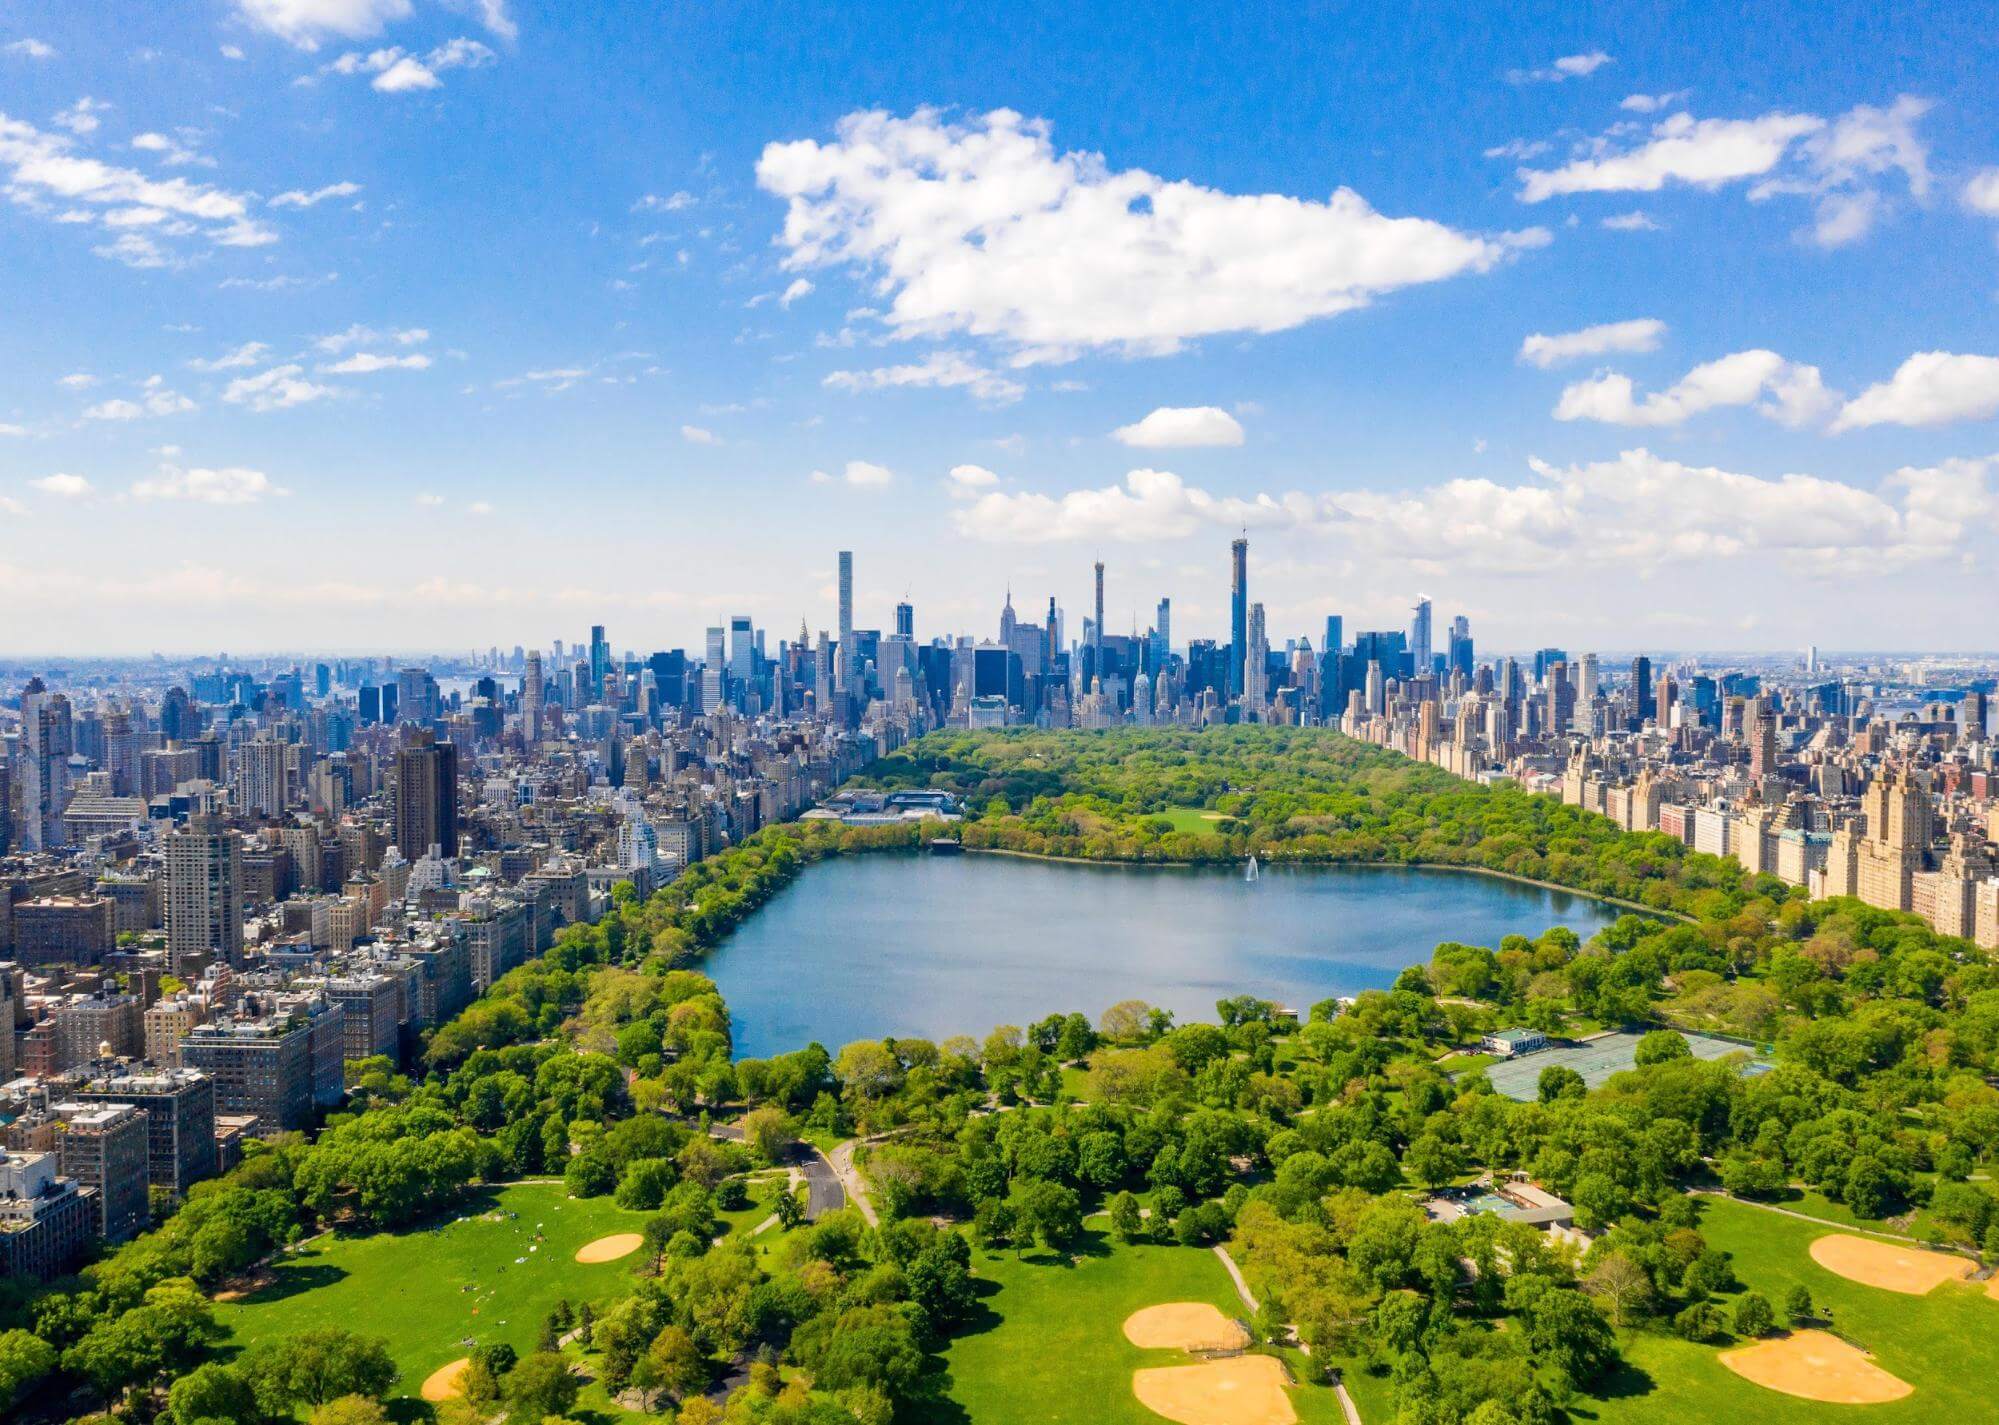 Aerial view of Central Park in New York.